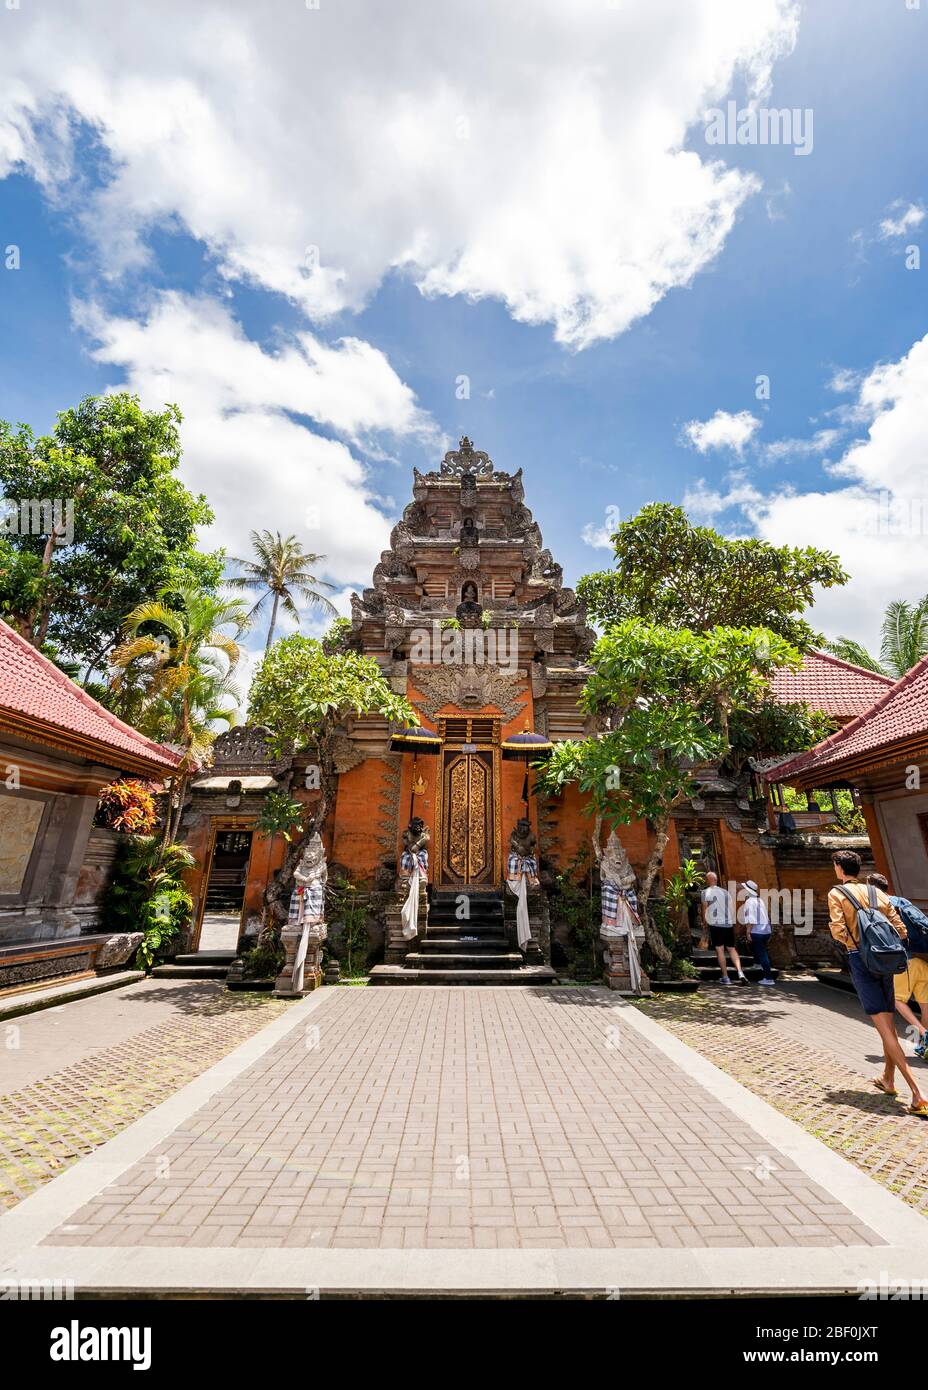 Vertical view of tourists at the main gates of Ubud palace in Bali, Indonesia. Stock Photo